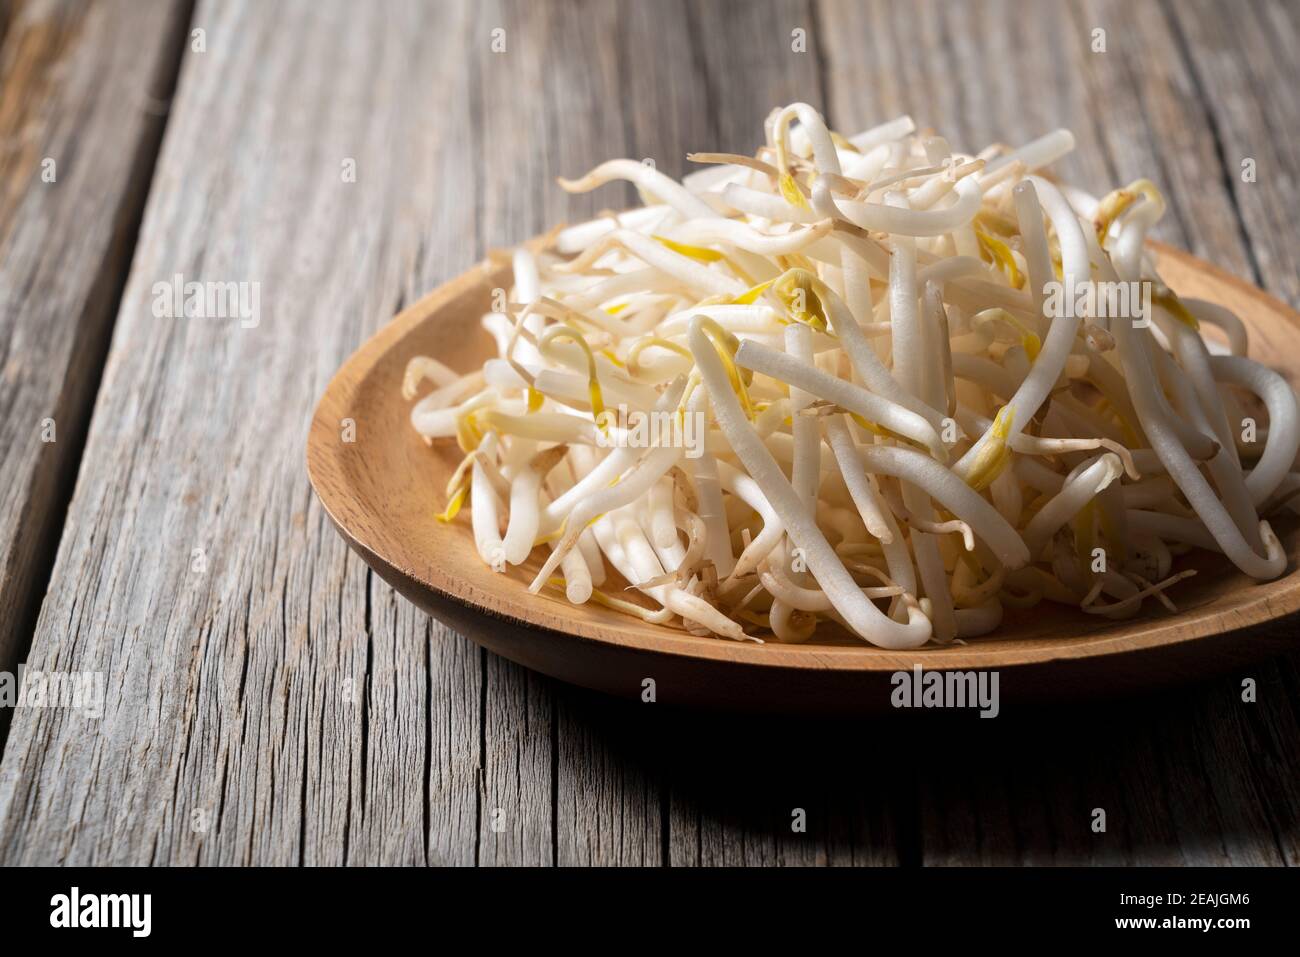 Bean sprouts in a wooden plate set against an old wooden background Stock Photo